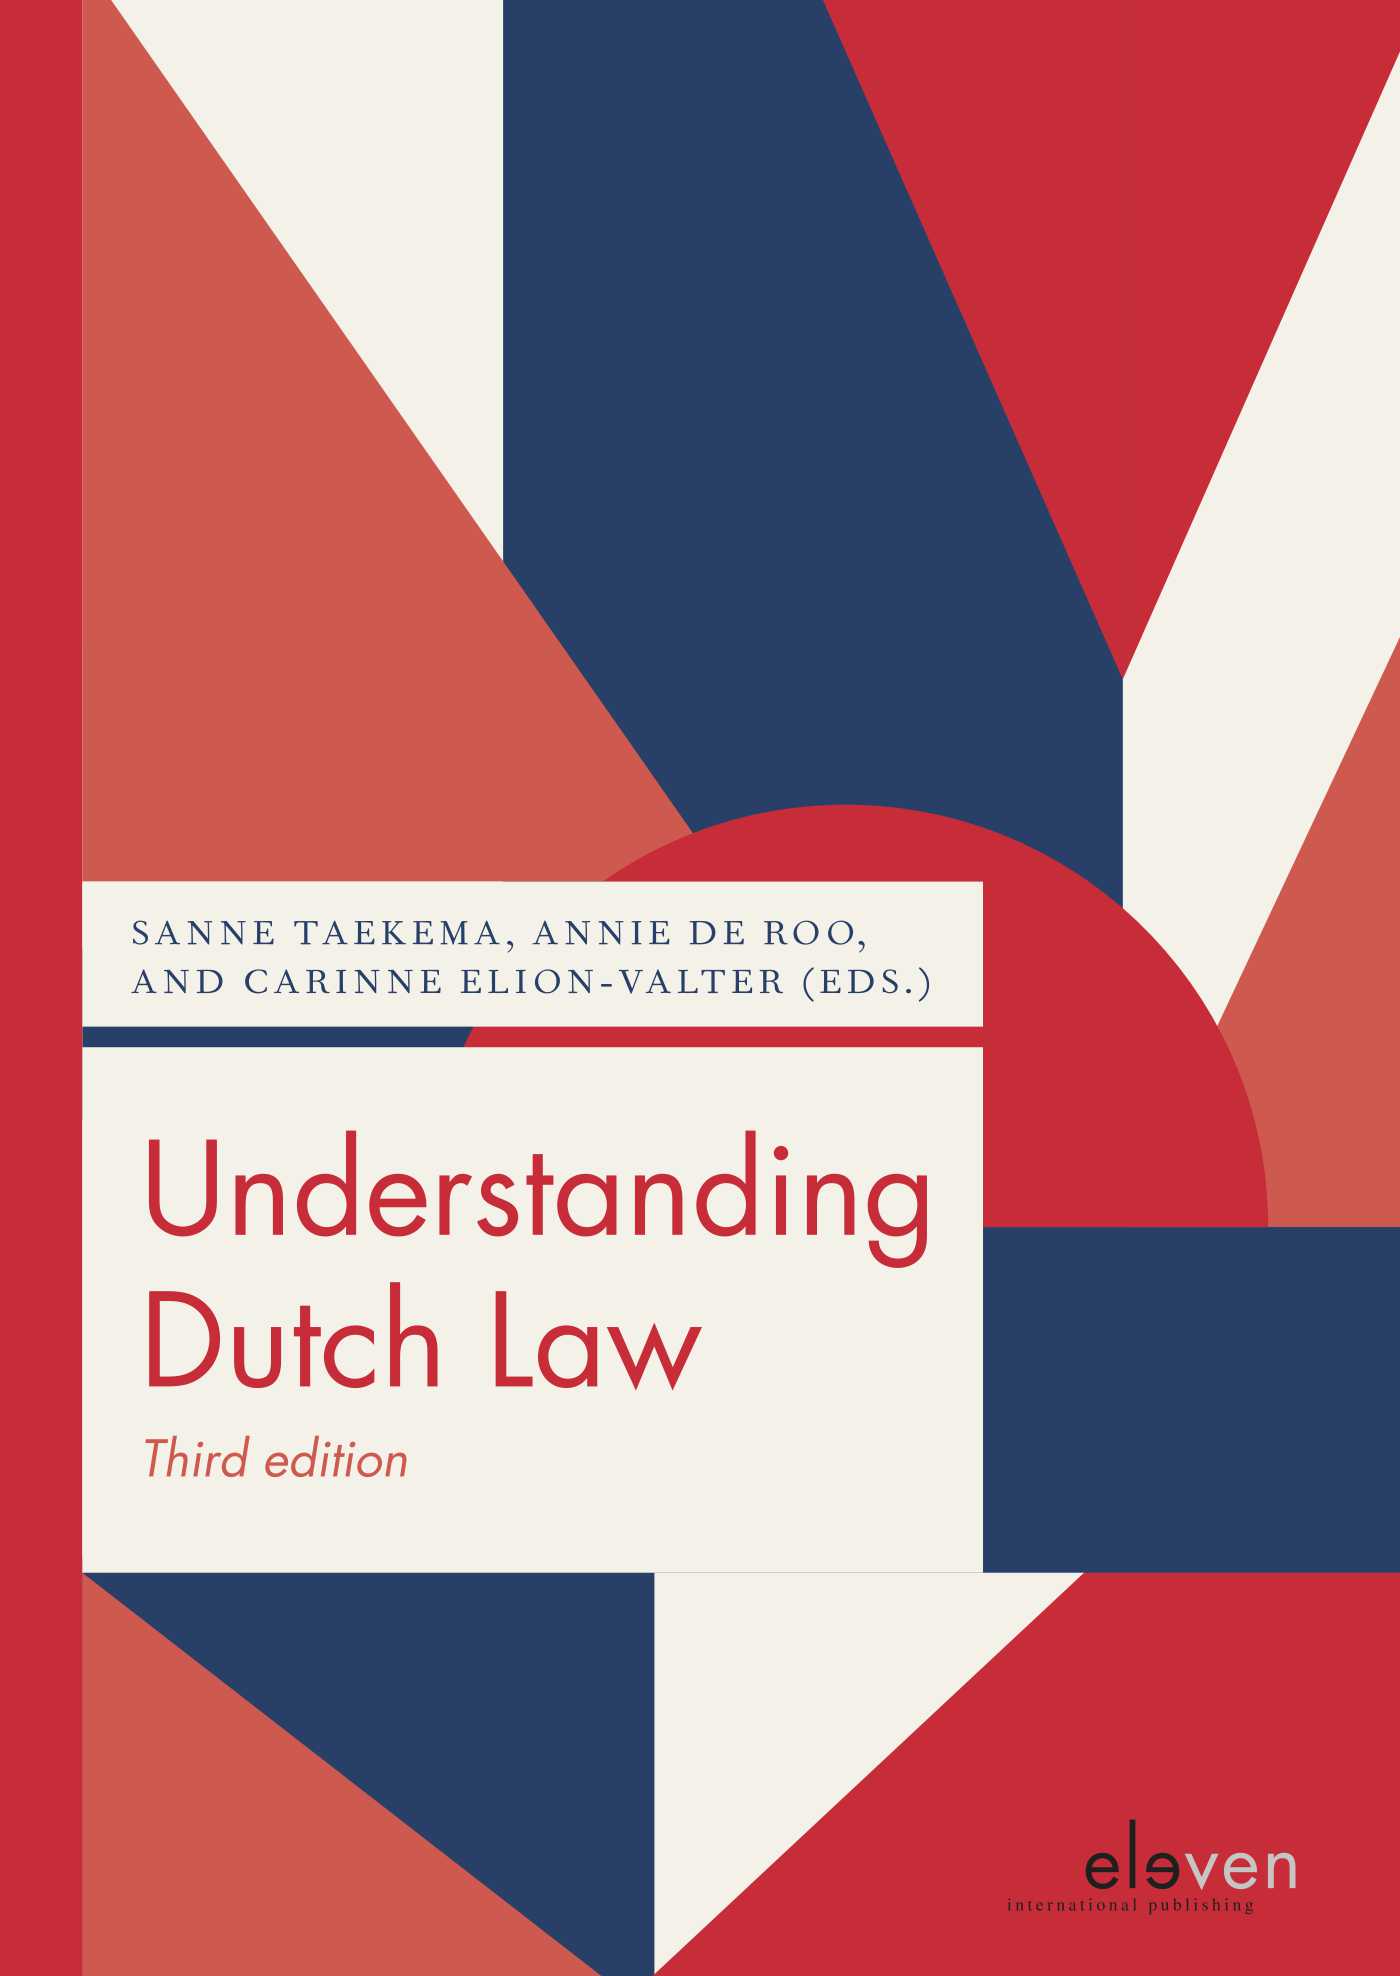 assignment dutch law